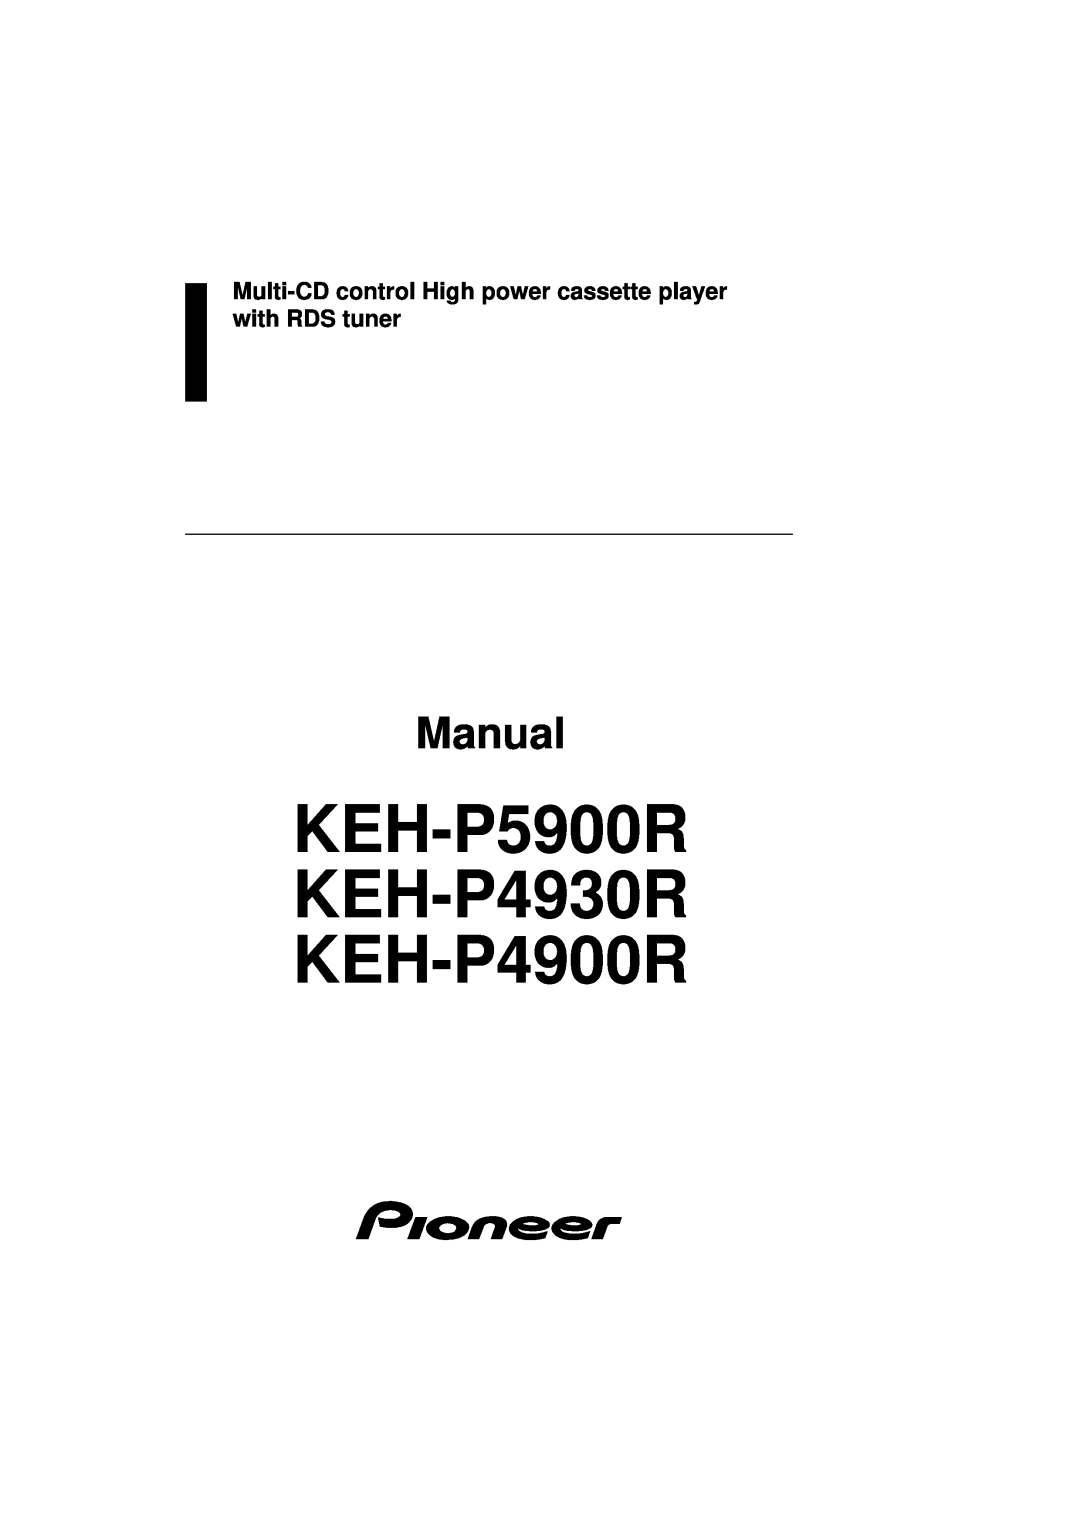 Pioneer manual KEH-P5900R KEH-P4930R KEH-P4900R, Manual, Multi-CD control High power cassette player with RDS tuner 